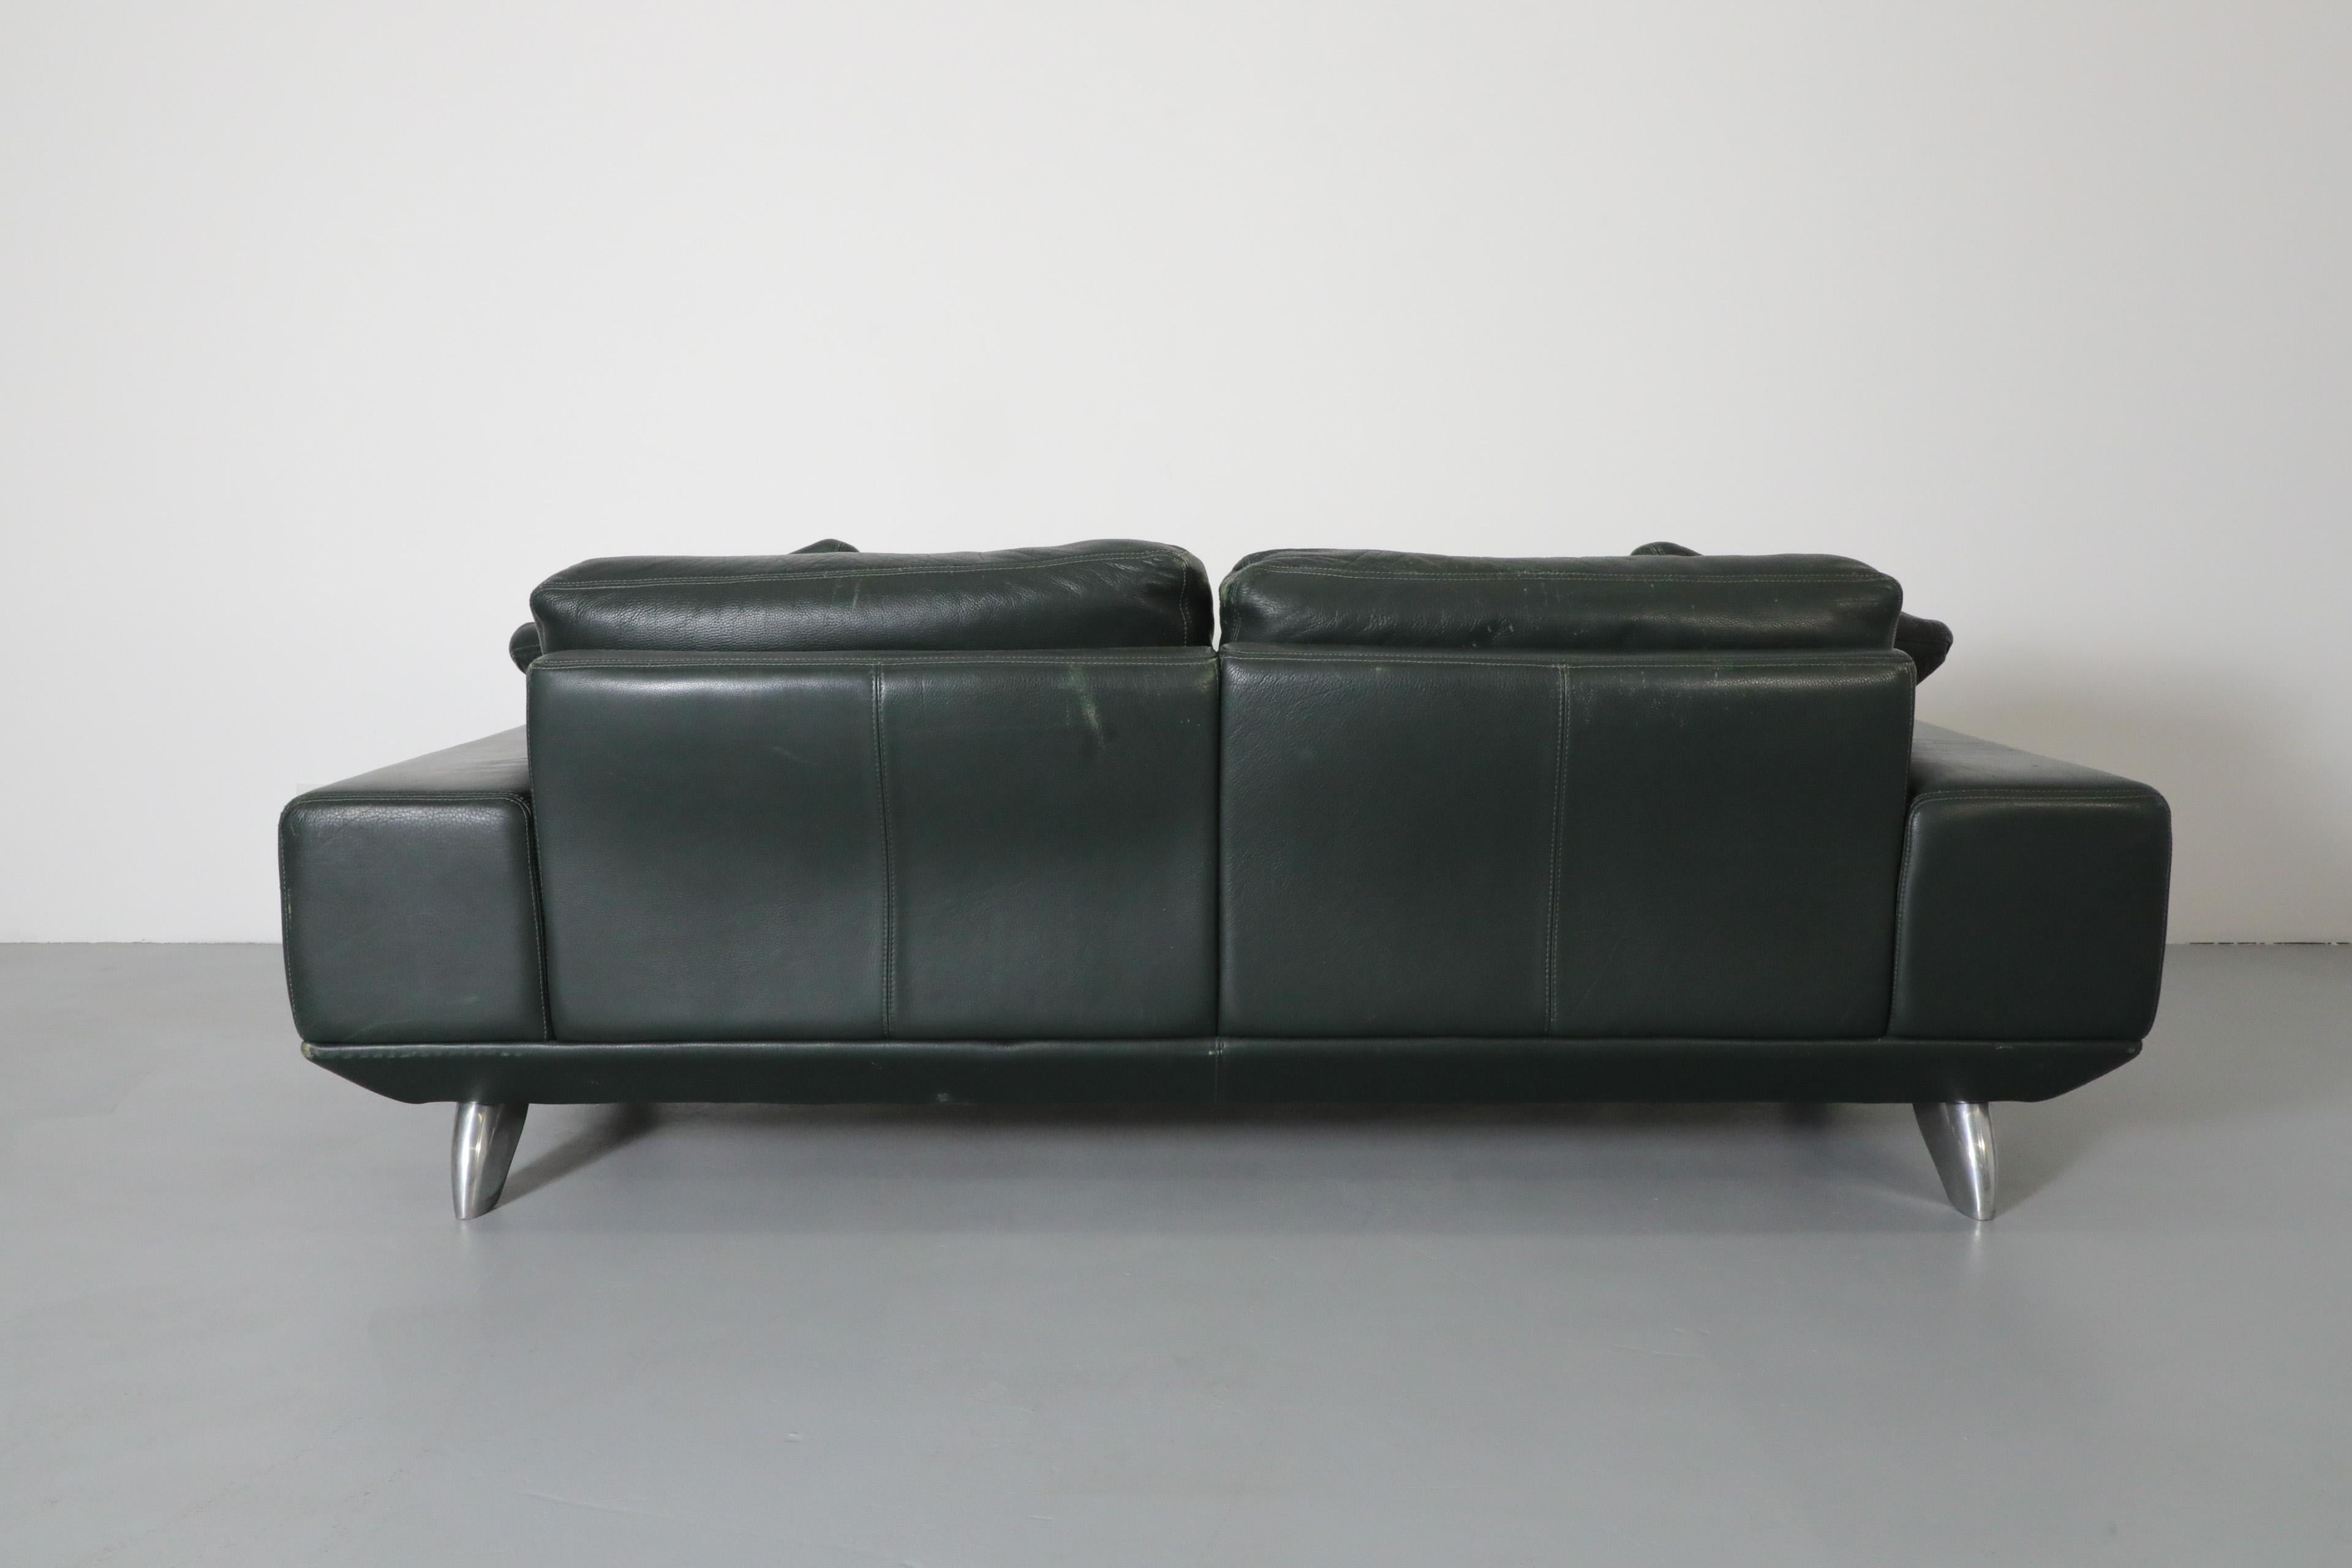 Handsome 80's Dark Green Leather Sofa by Molinari w/ Wide Arms & Metal Legs For Sale 3